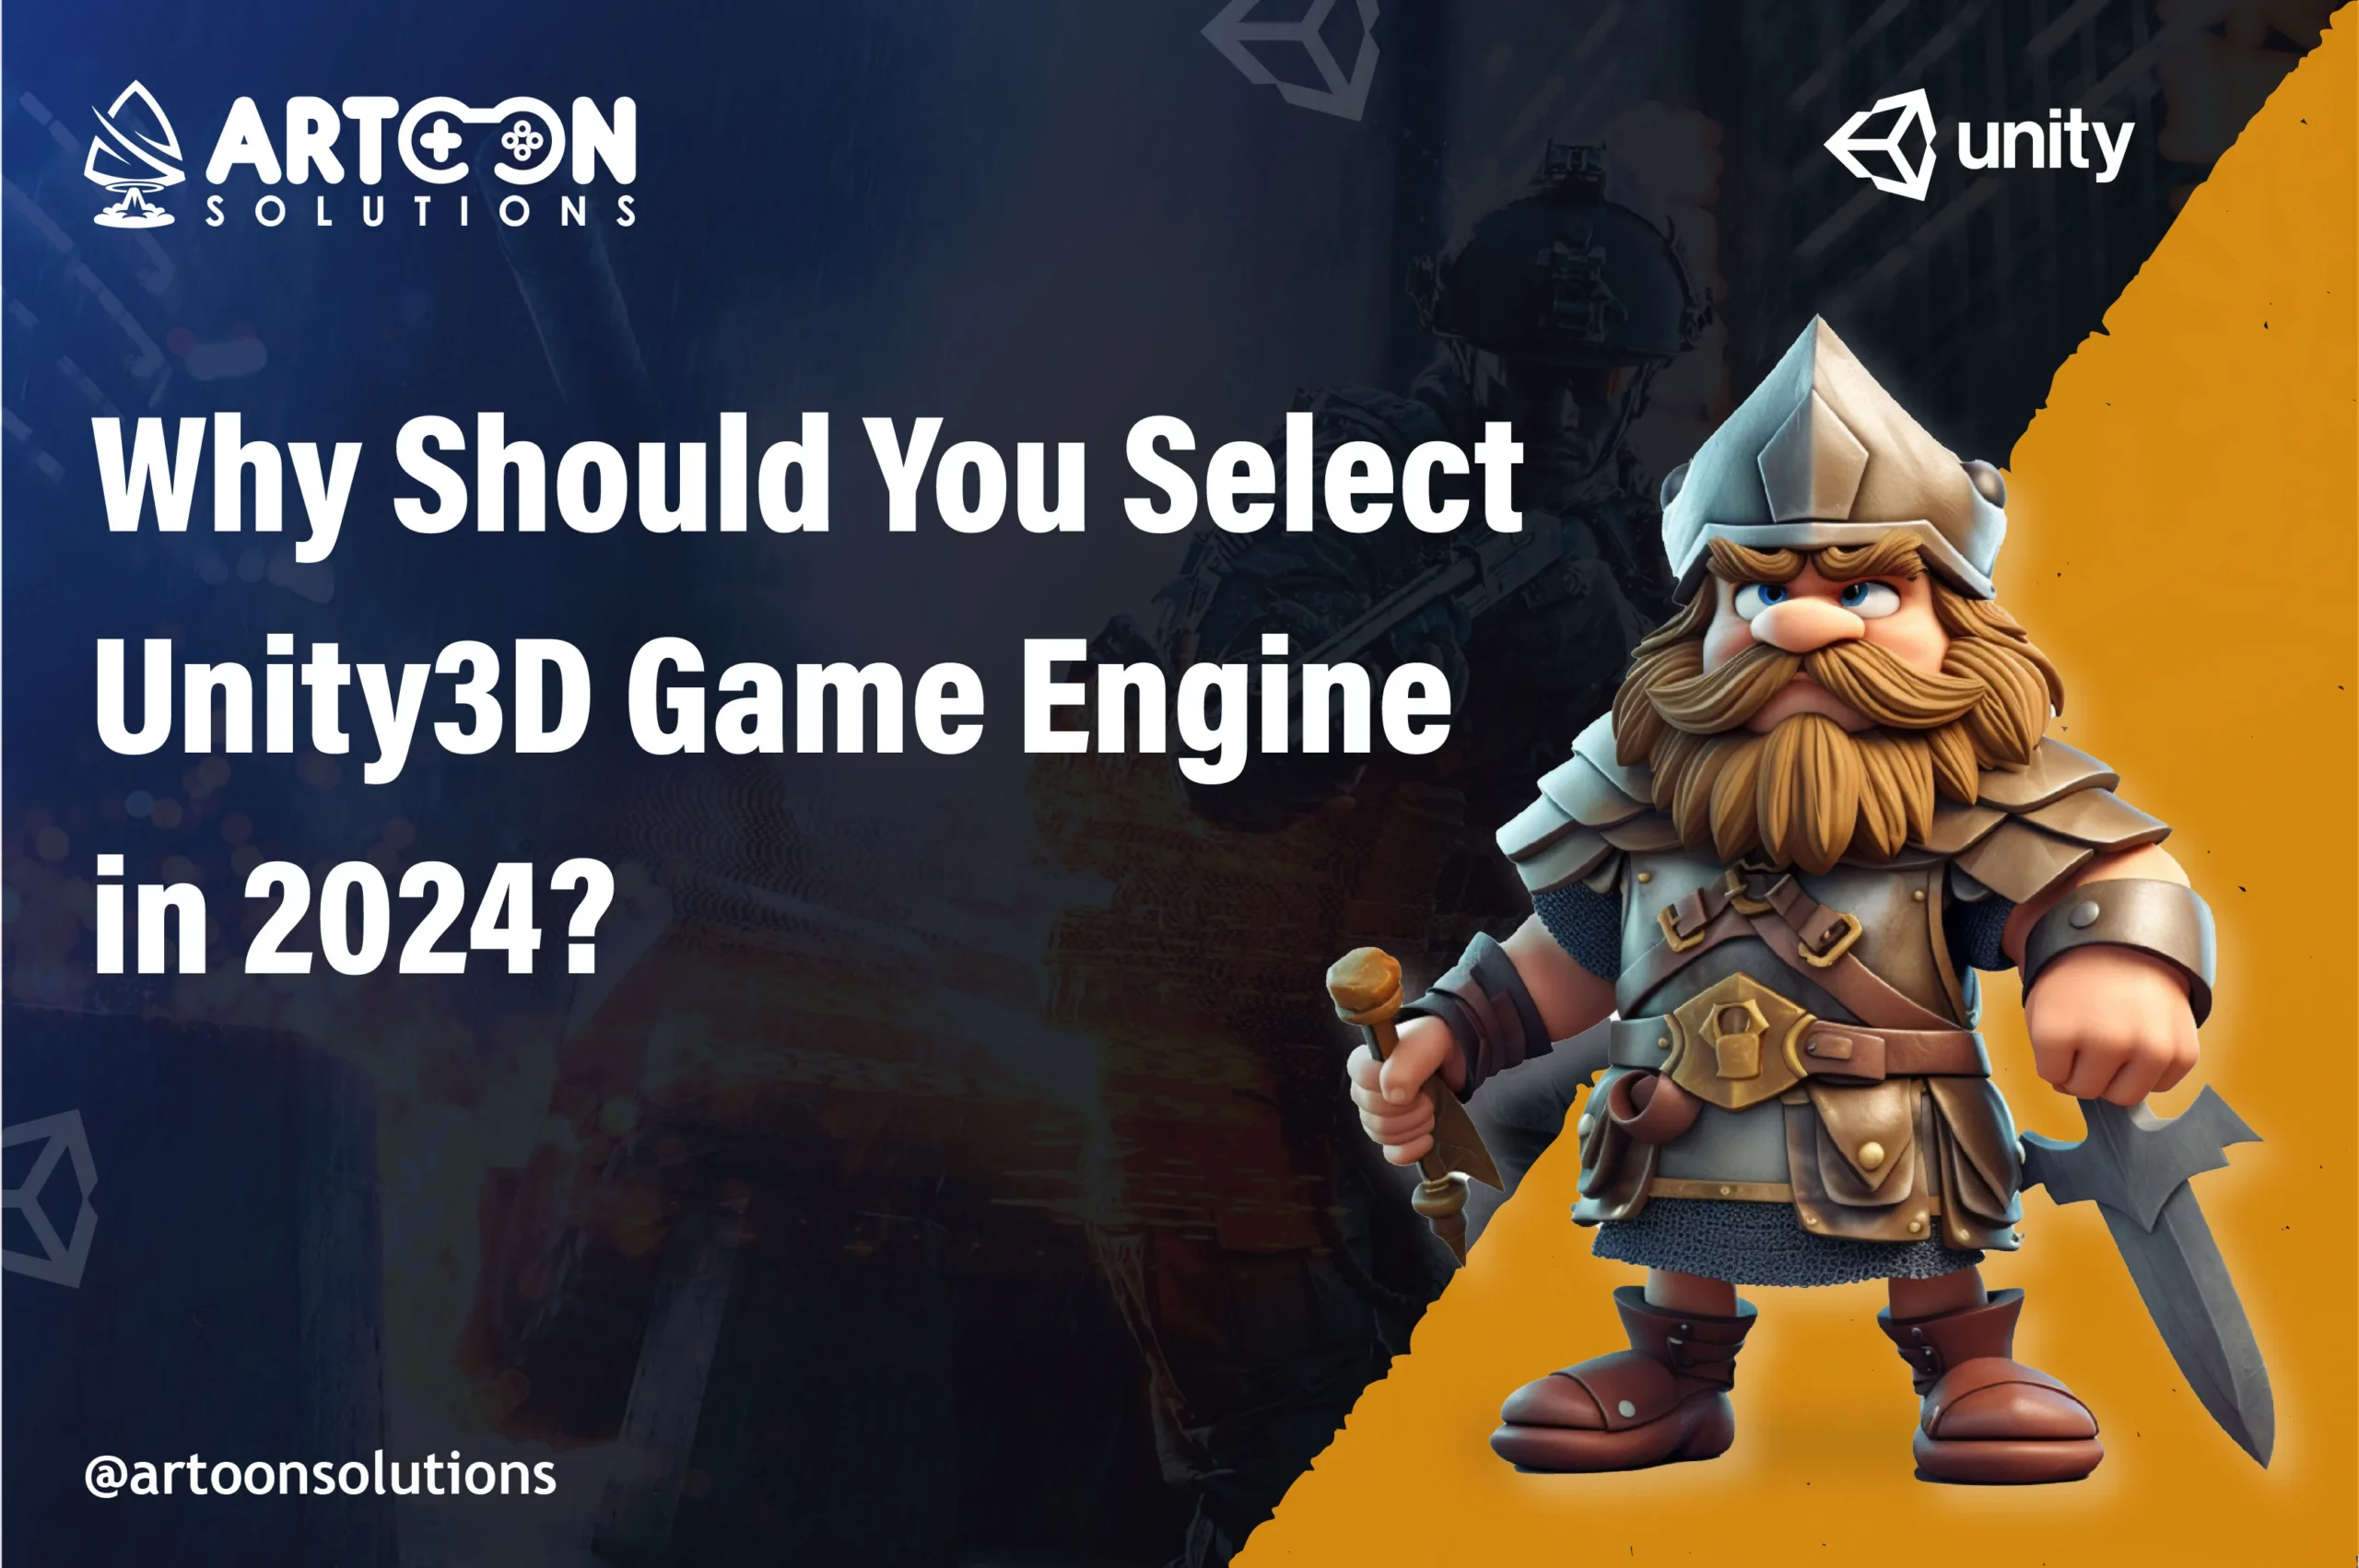 Why Should You Select Unity3D Game Engine in 2024?